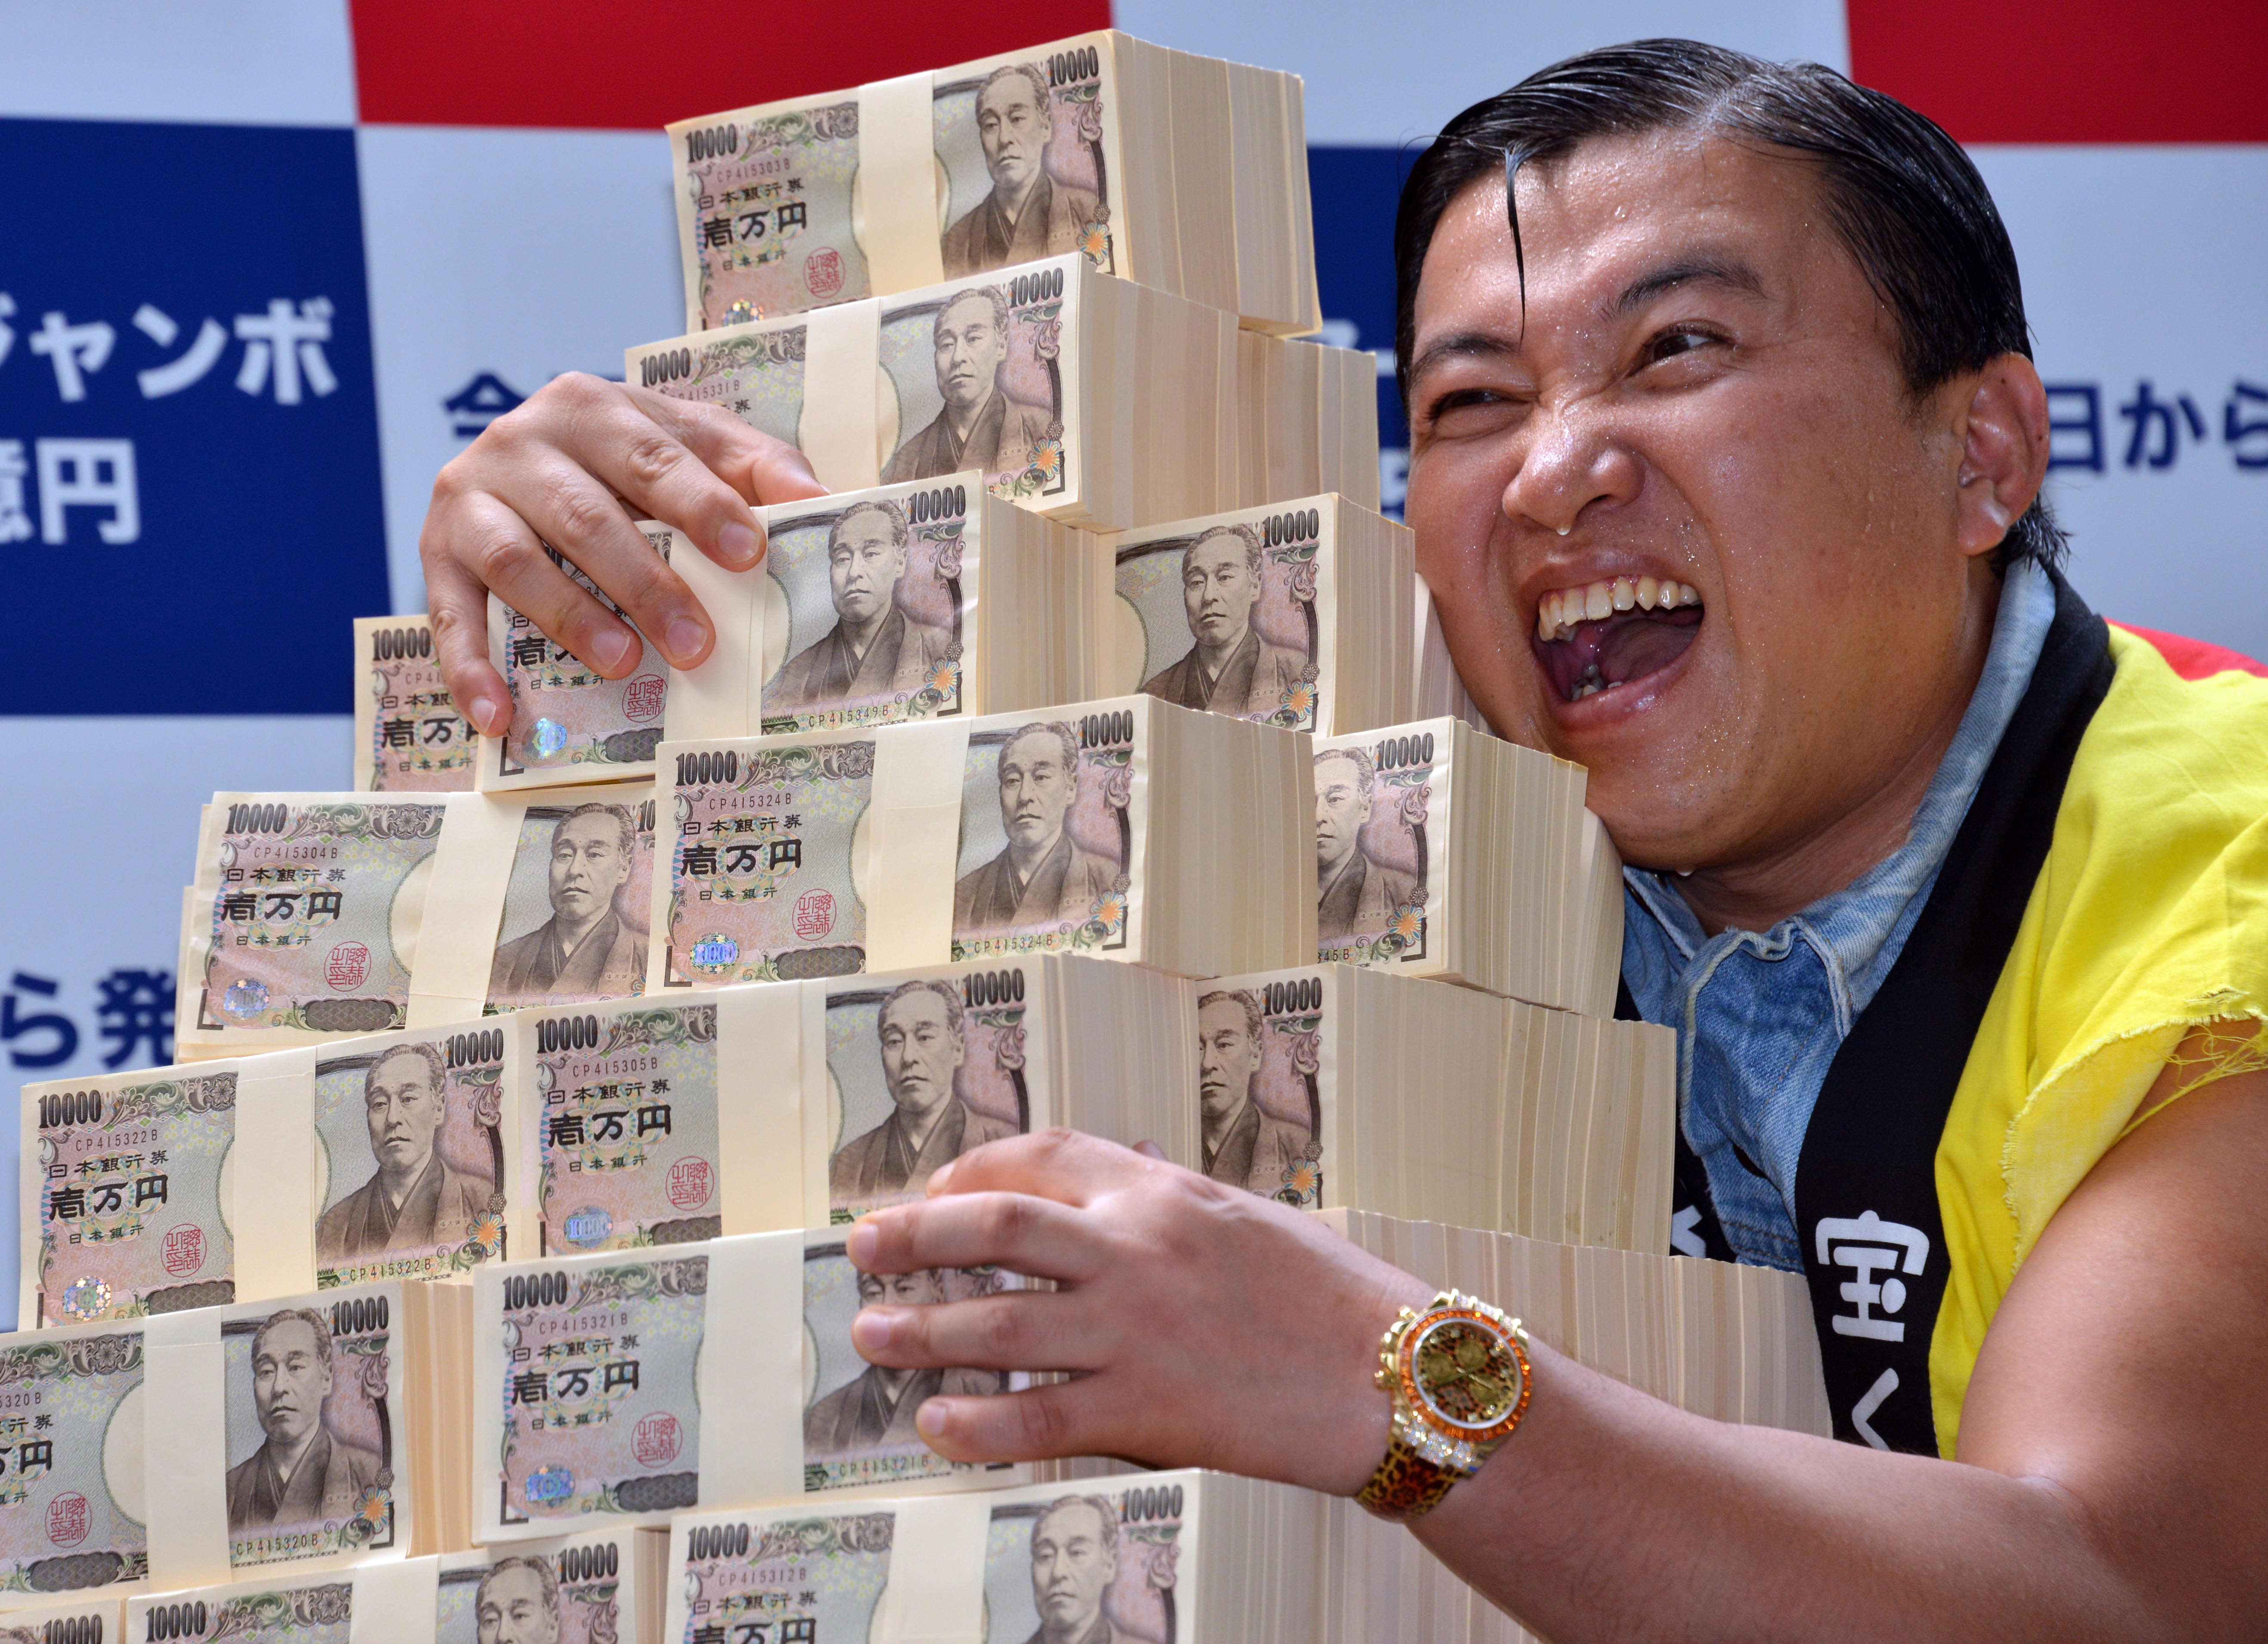 The Yen Will Weaken Because The Global Economy Is Growing Says Strategist